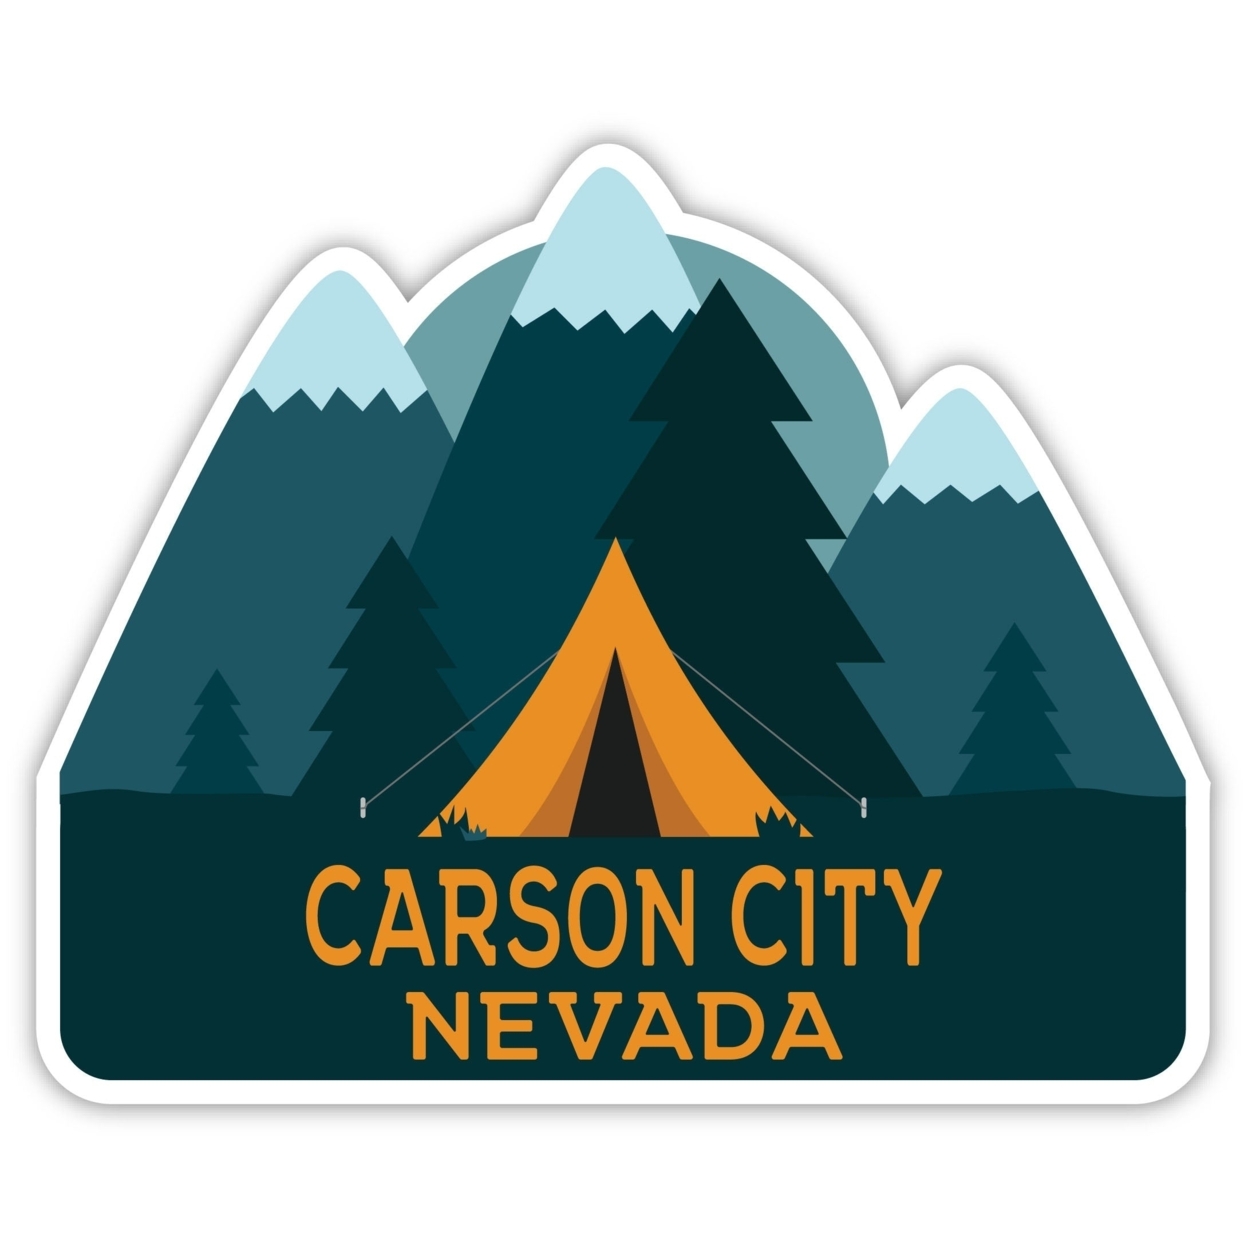 Carson City Nevada Souvenir Decorative Stickers (Choose Theme And Size) - 4-Pack, 12-Inch, Tent